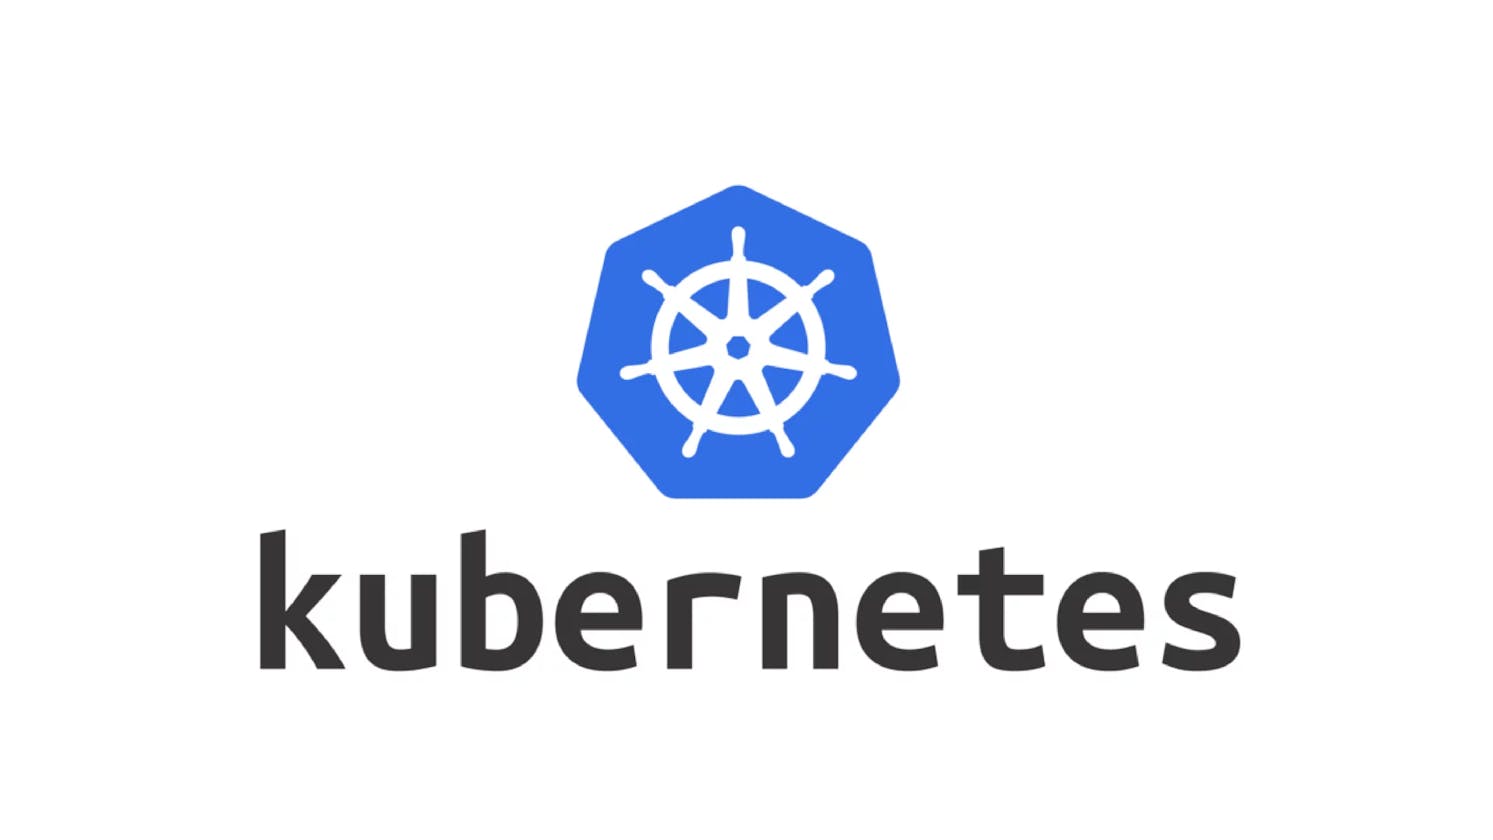 How to setup k8's cluster for V-1.28 with Kubeadm